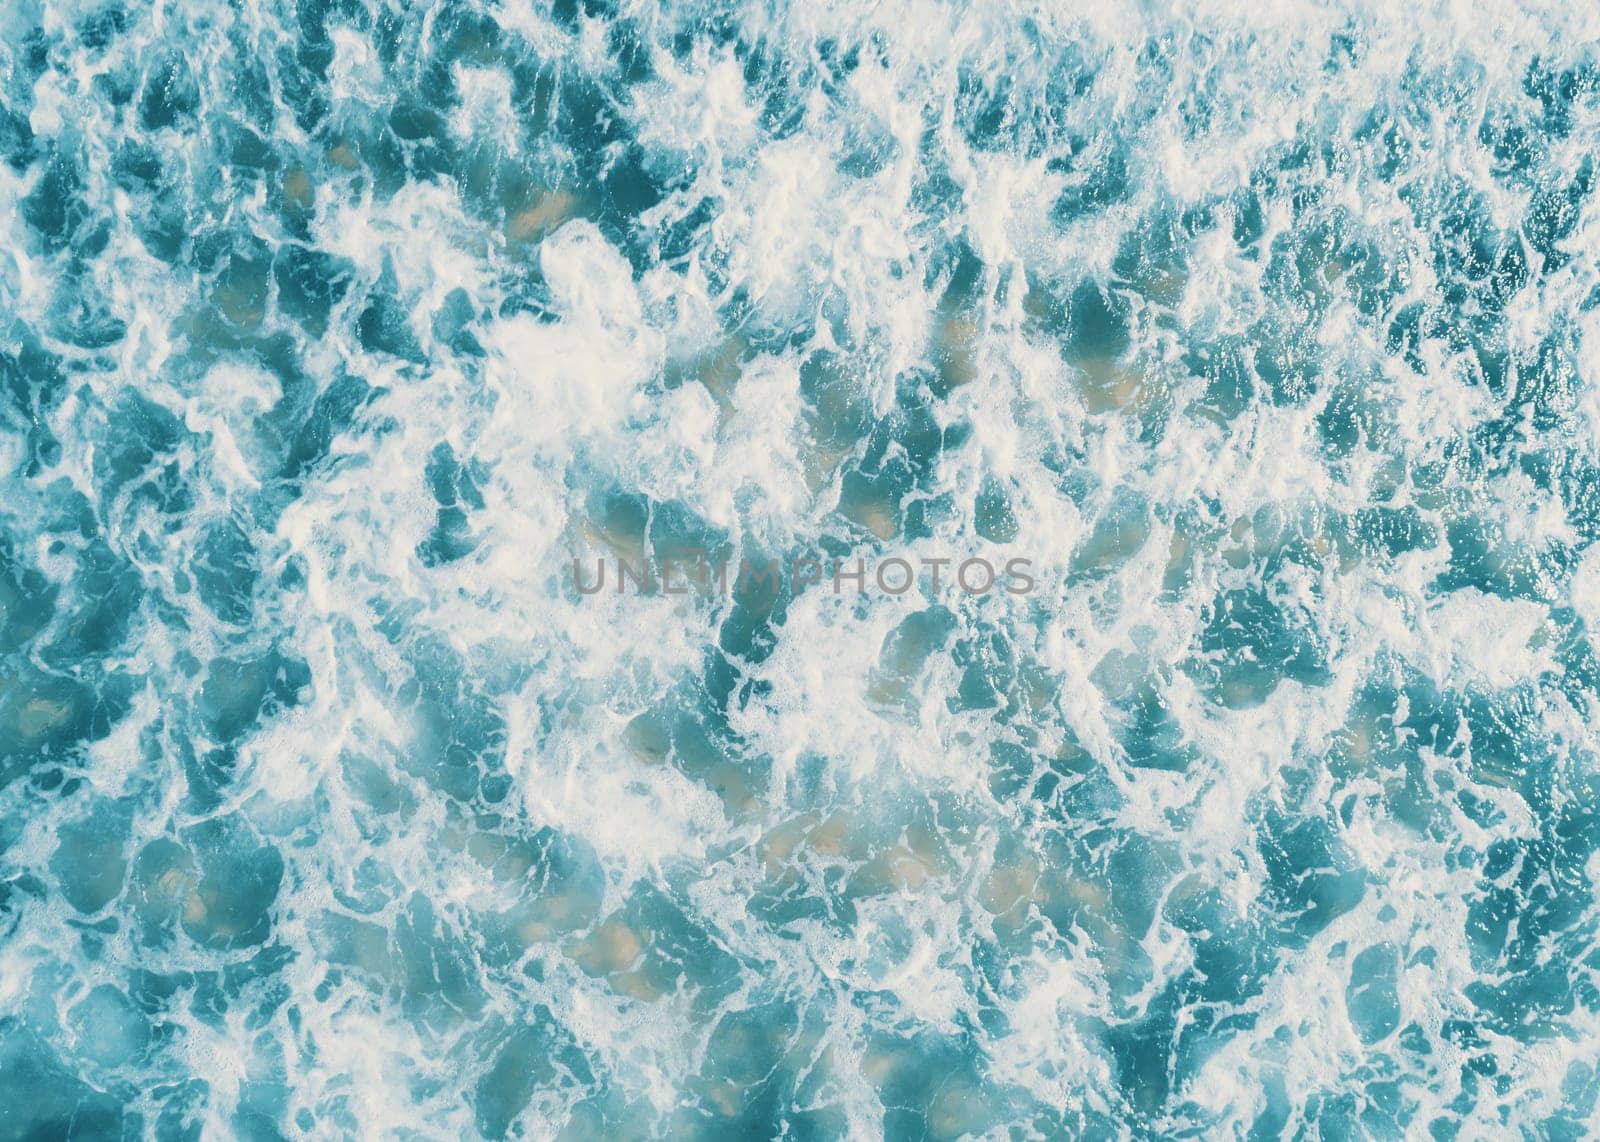 Aerial view of white foam on the surface of the blue sea.